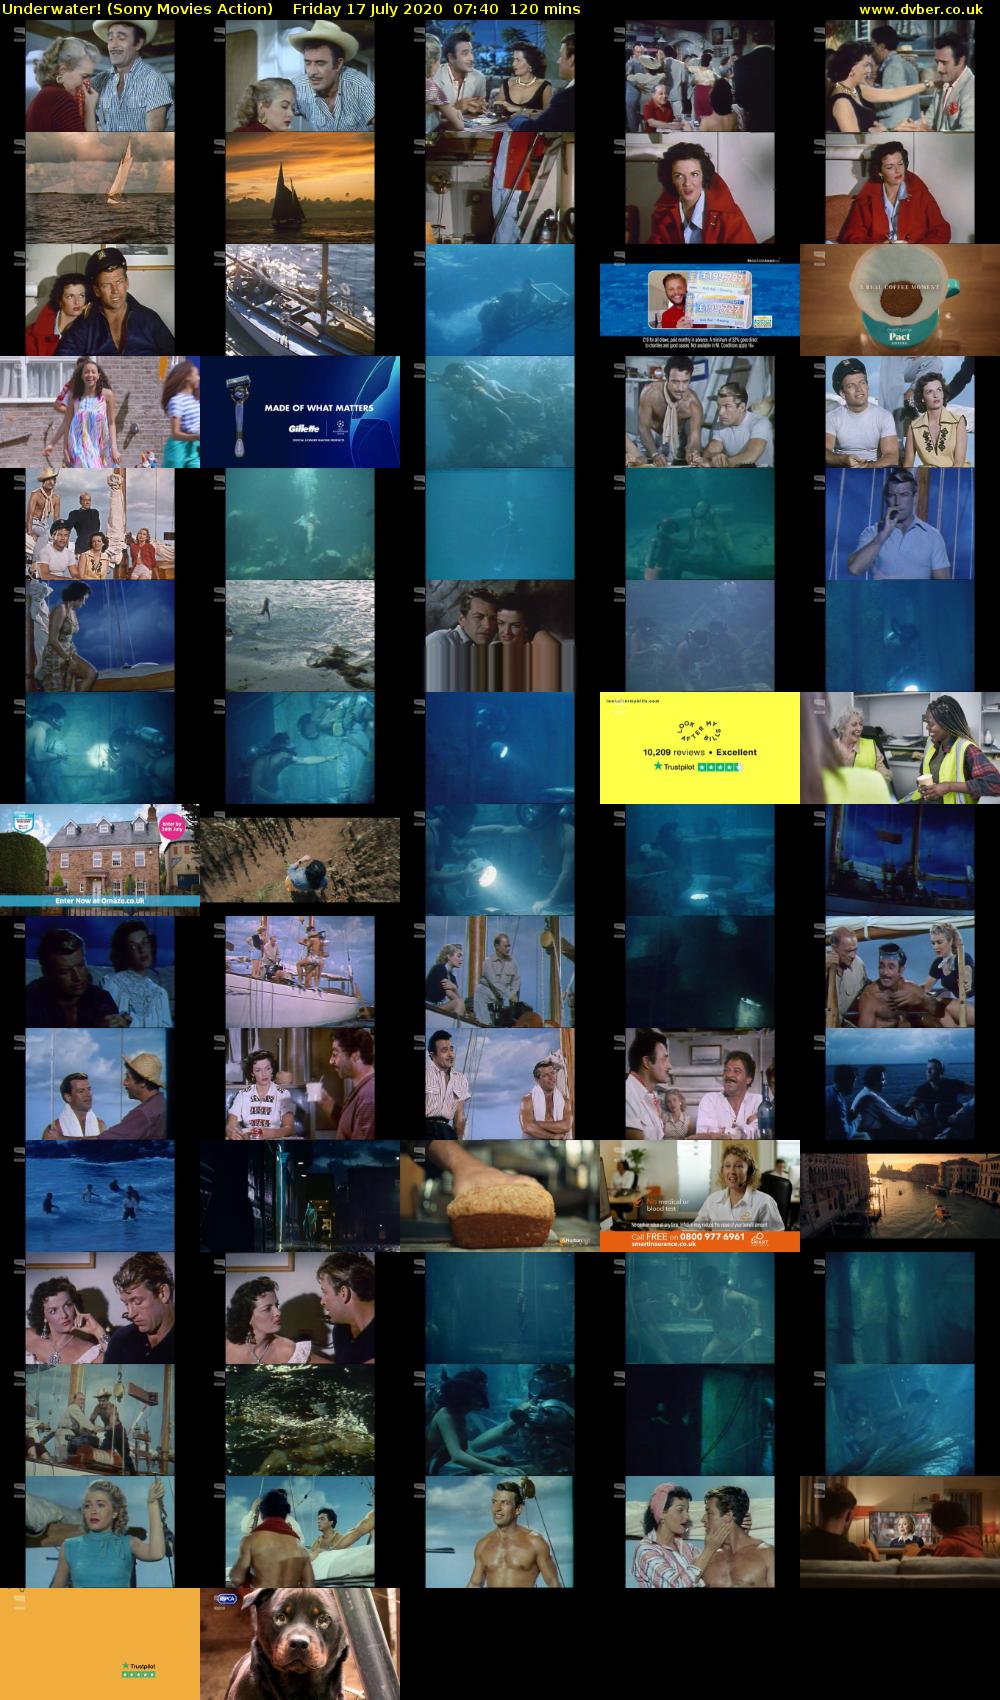 Underwater! (Sony Movies Action) Friday 17 July 2020 07:40 - 09:40